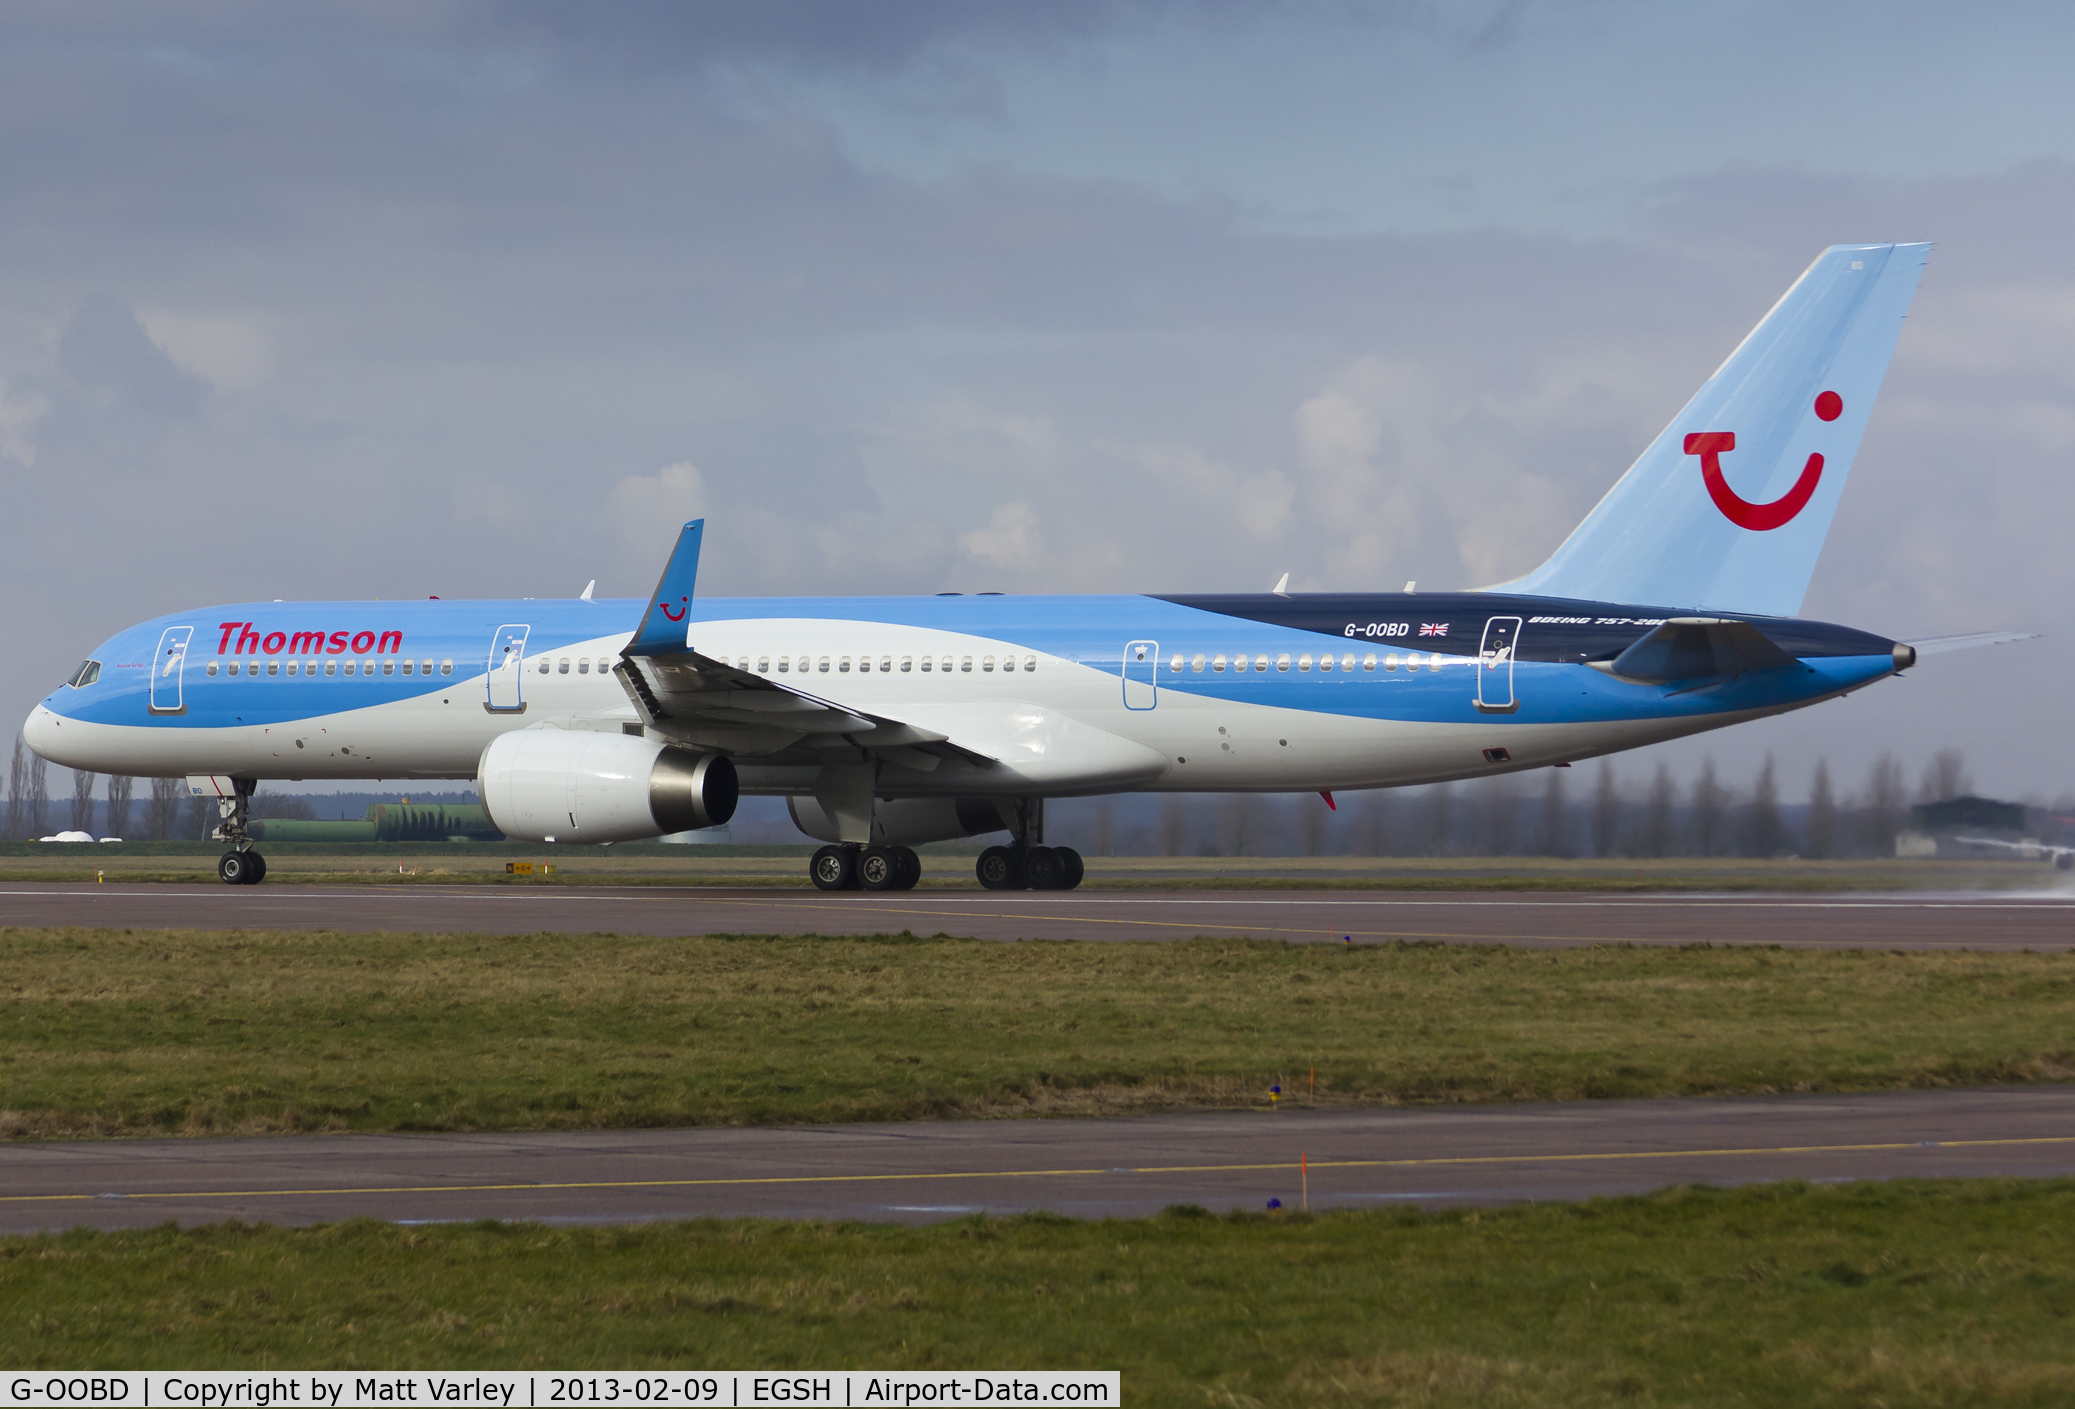 G-OOBD, 2003 Boeing 757-28A C/N 33099, Departing EGSH after spray into Thomson's Dreamliner livery.